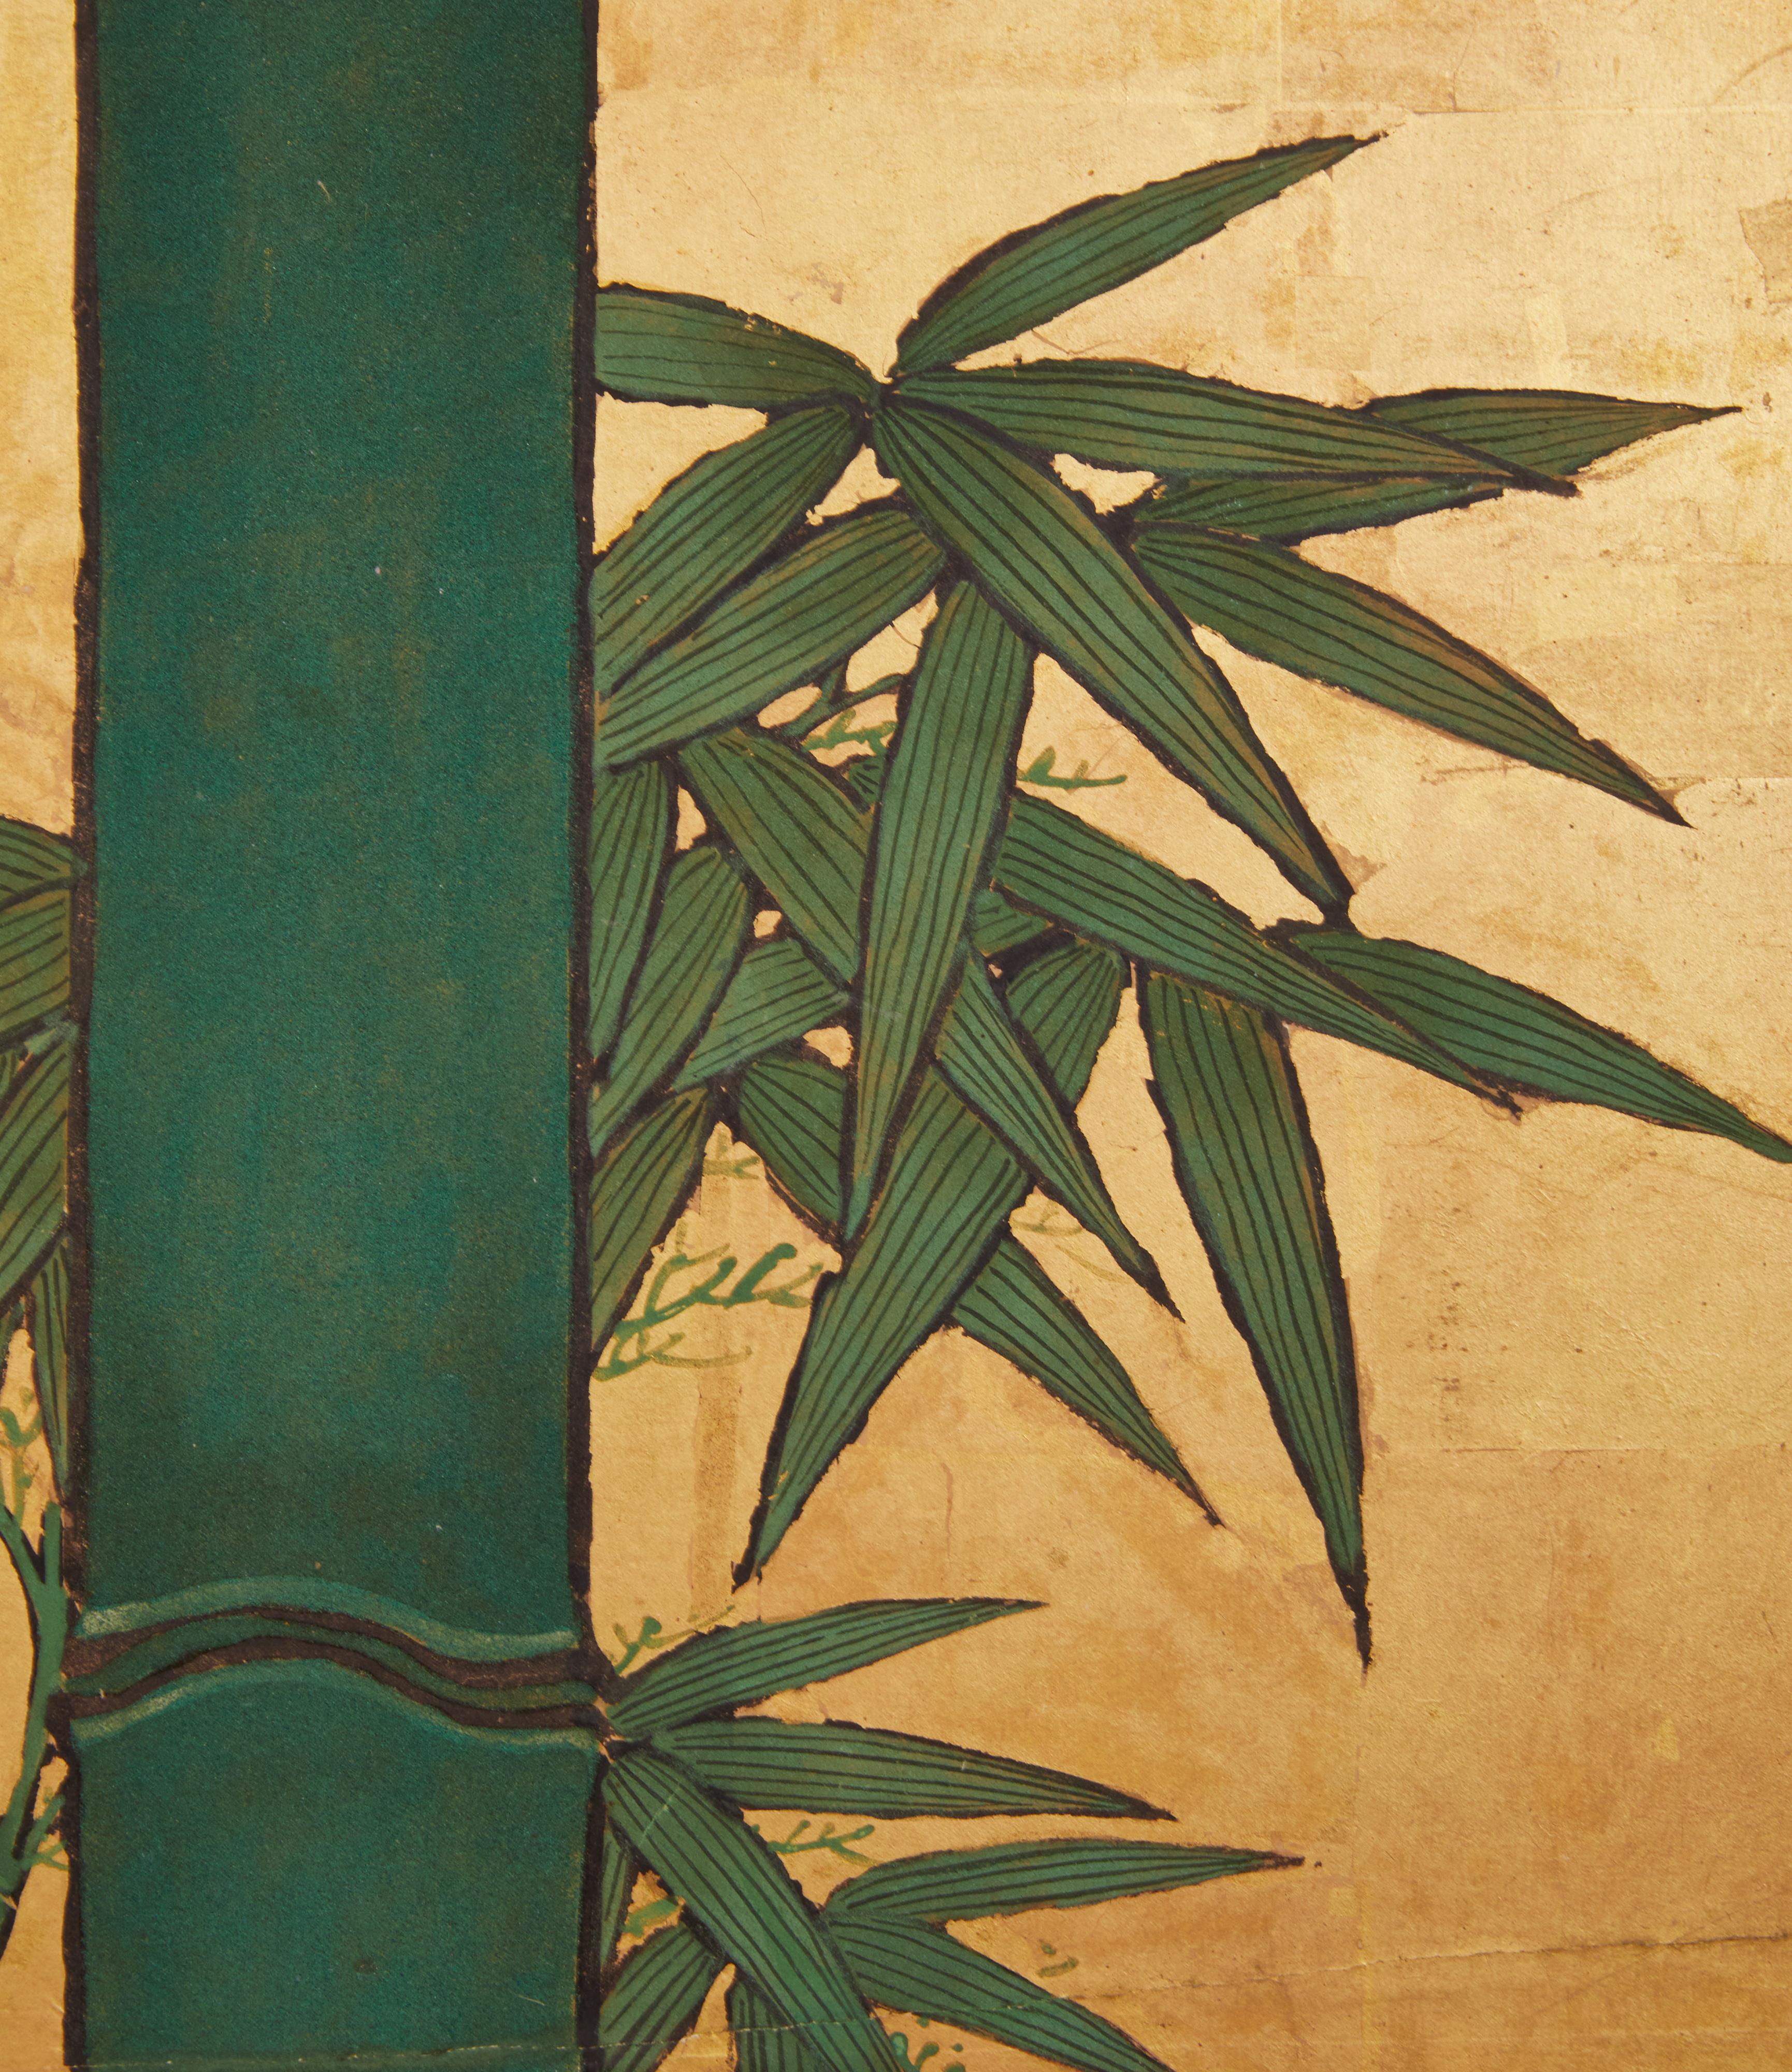 Bamboo grove on a knoll with stylized gold mist. Mineral pigments on gold leaf with silk brocade border.